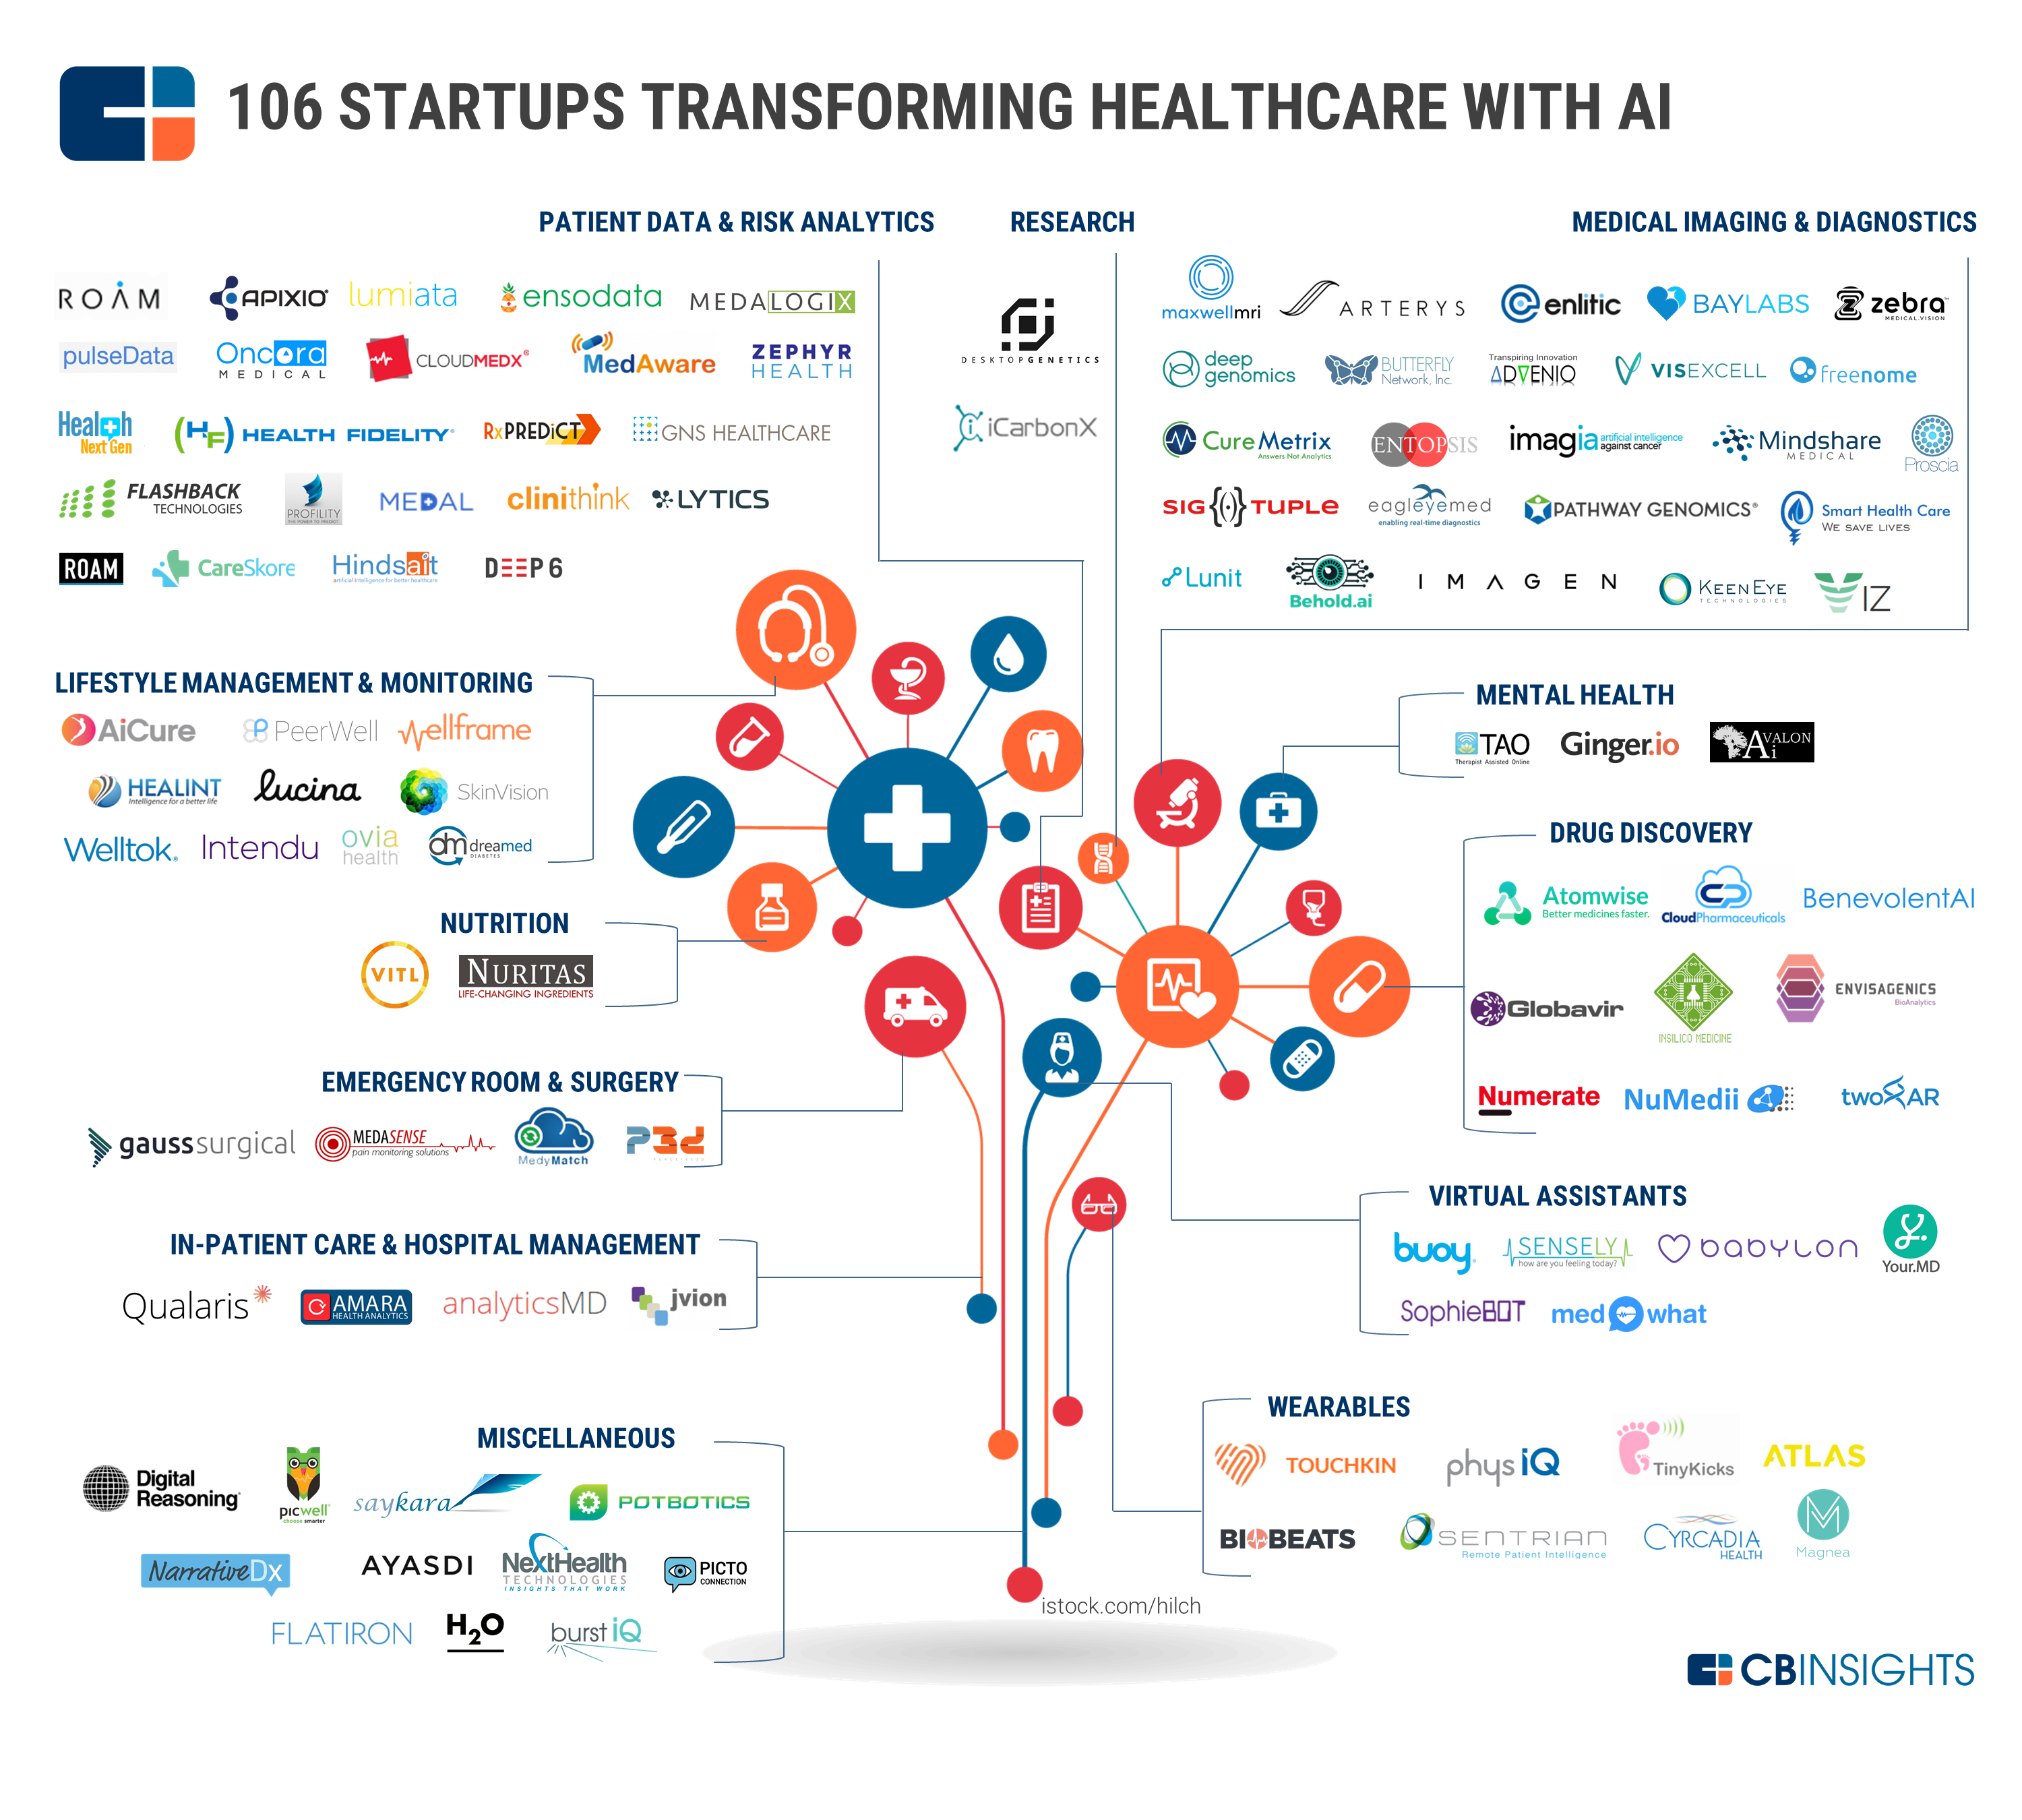 Overview of startups transforming healthcare with AI, graphic